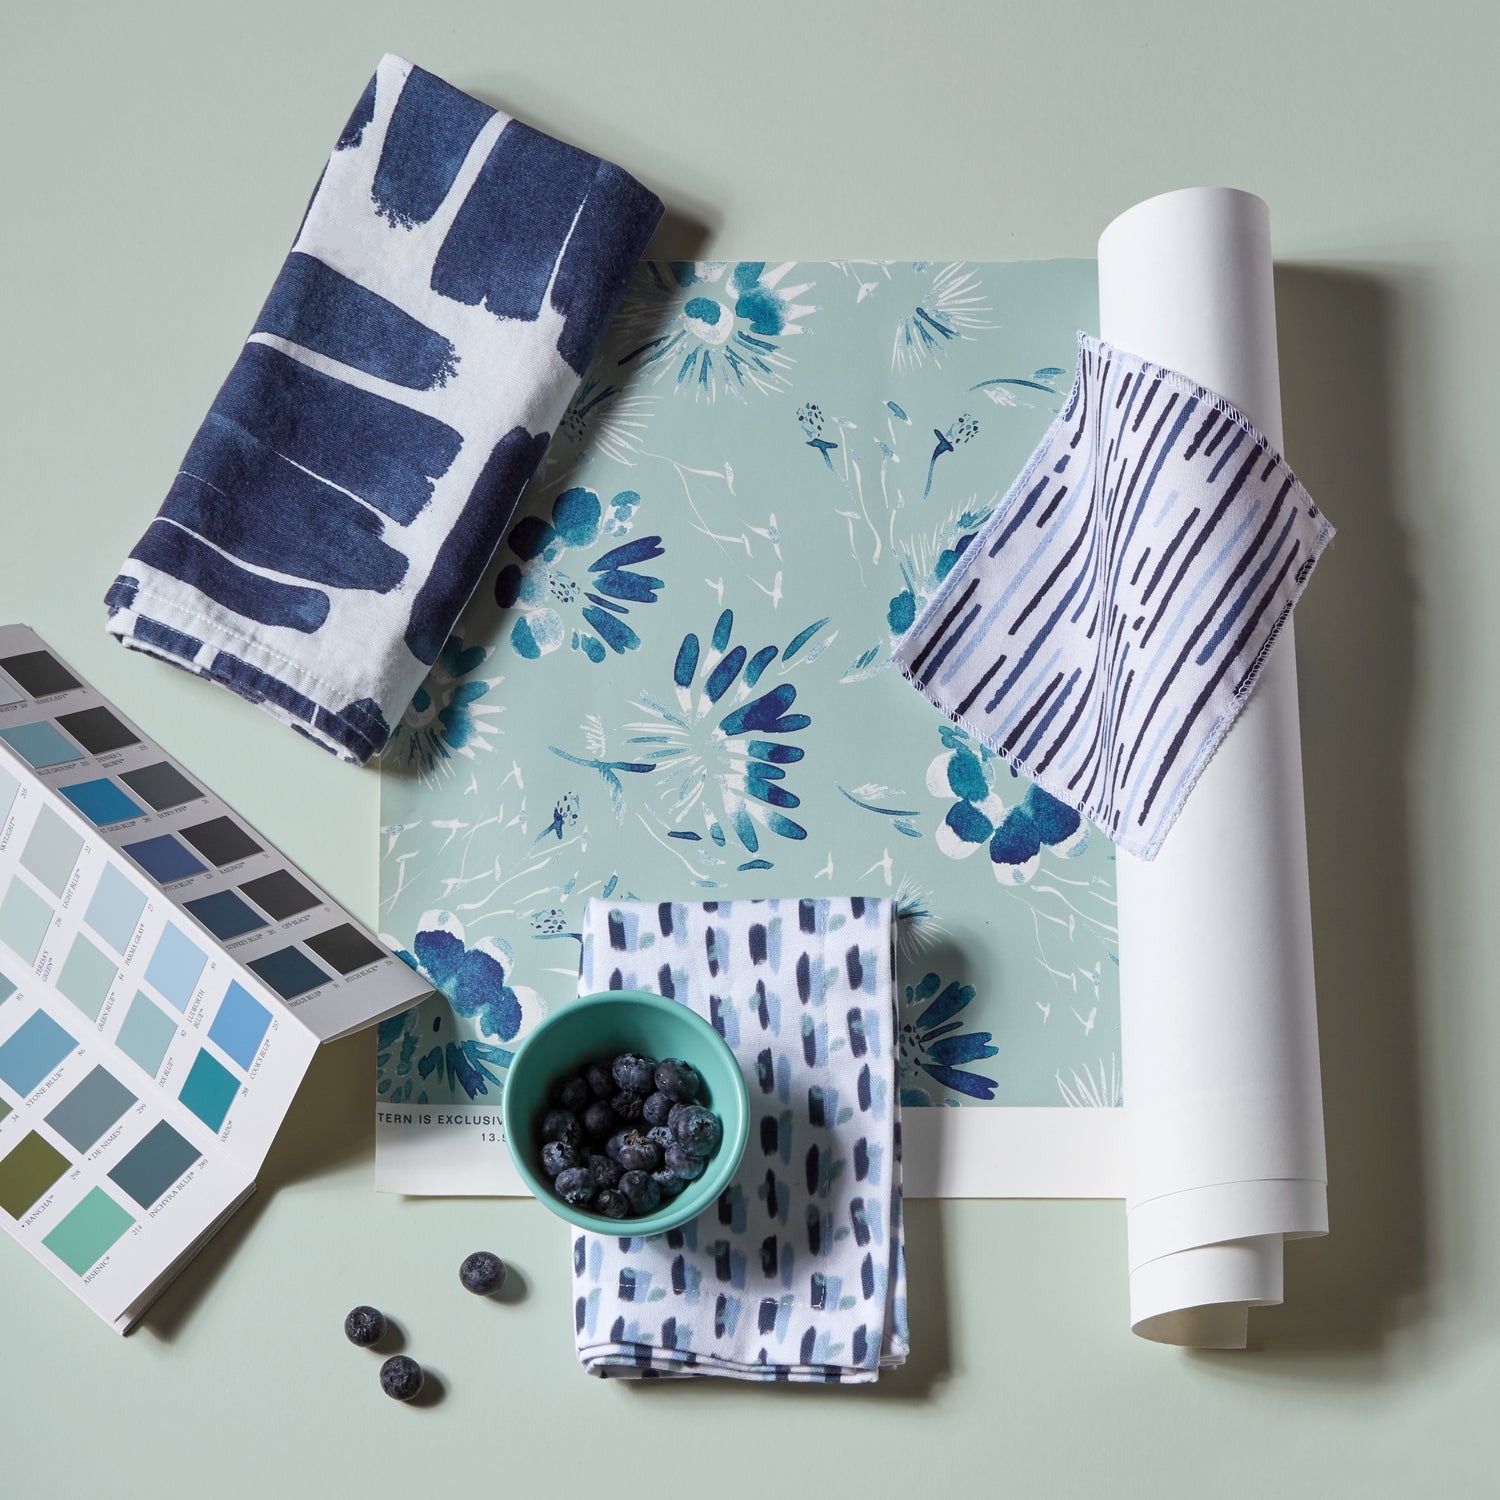 Interior design moodboard and fabric inspirations with Sky and Navy Blue Poppy Printed Swatch, Navy Brushstokes Pattern Printed Swatch, and Floral Navy printed swatch